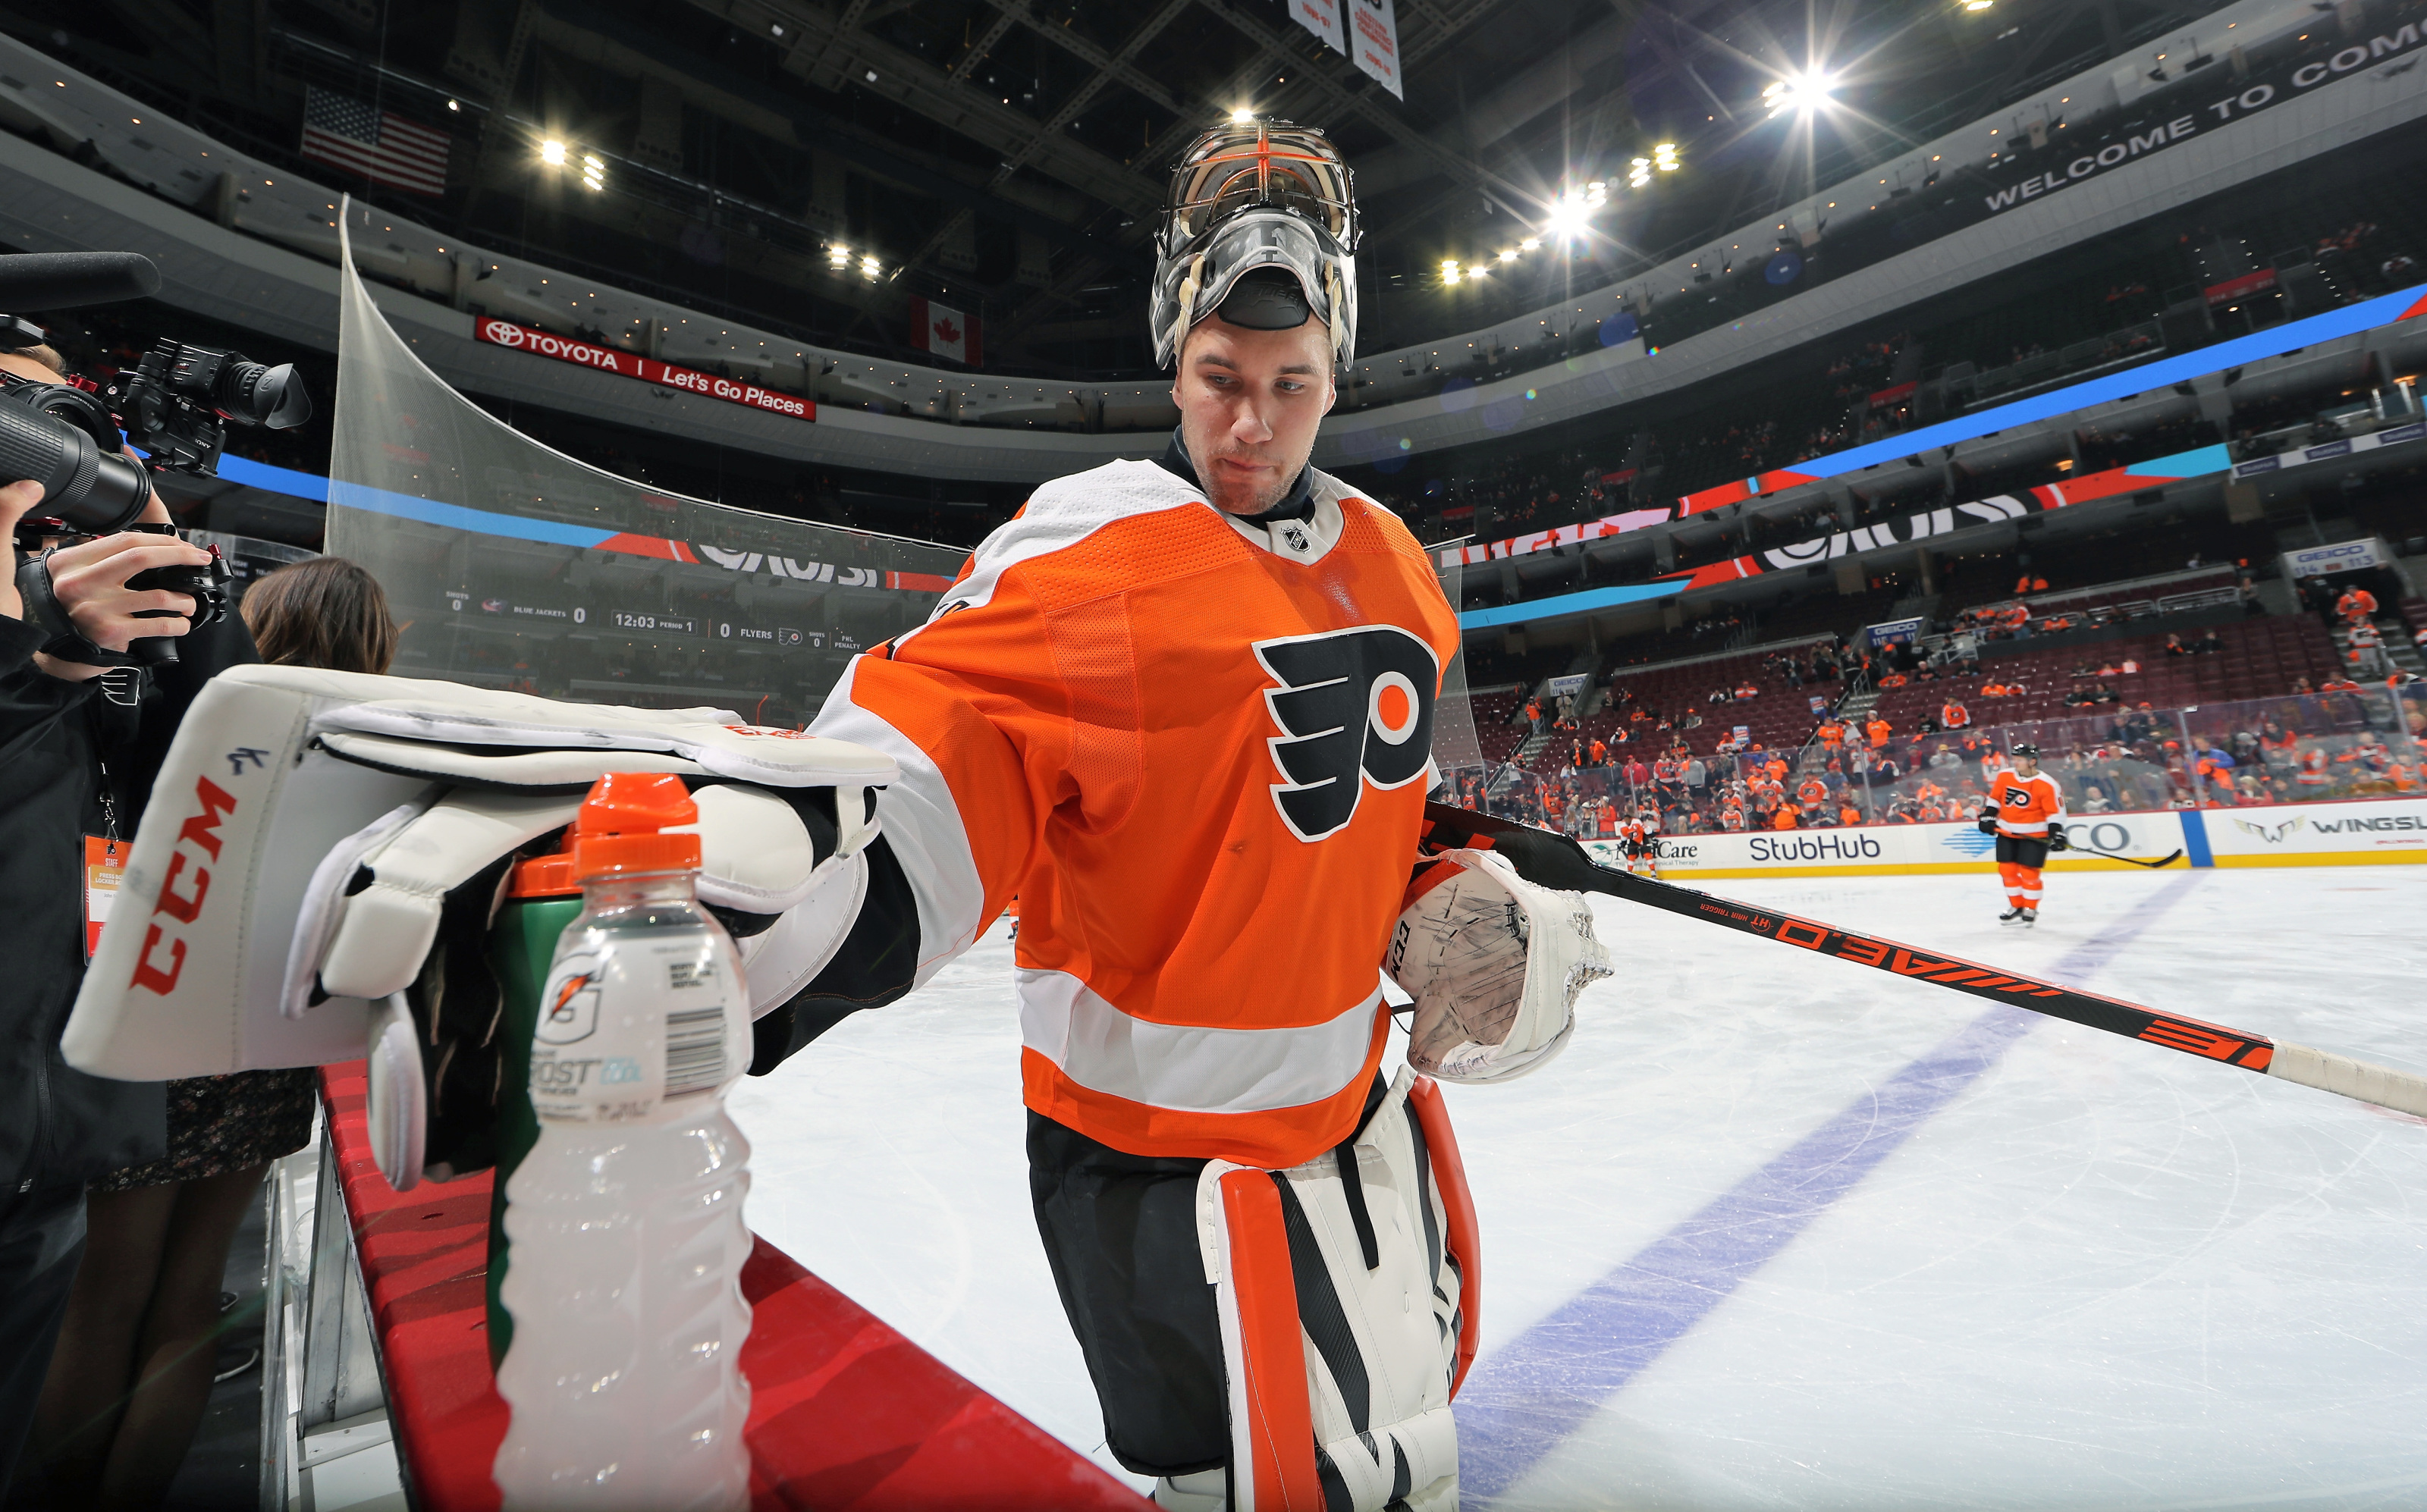 Flyers goalie Anthony Stolarz moving from unwanted to invaluable